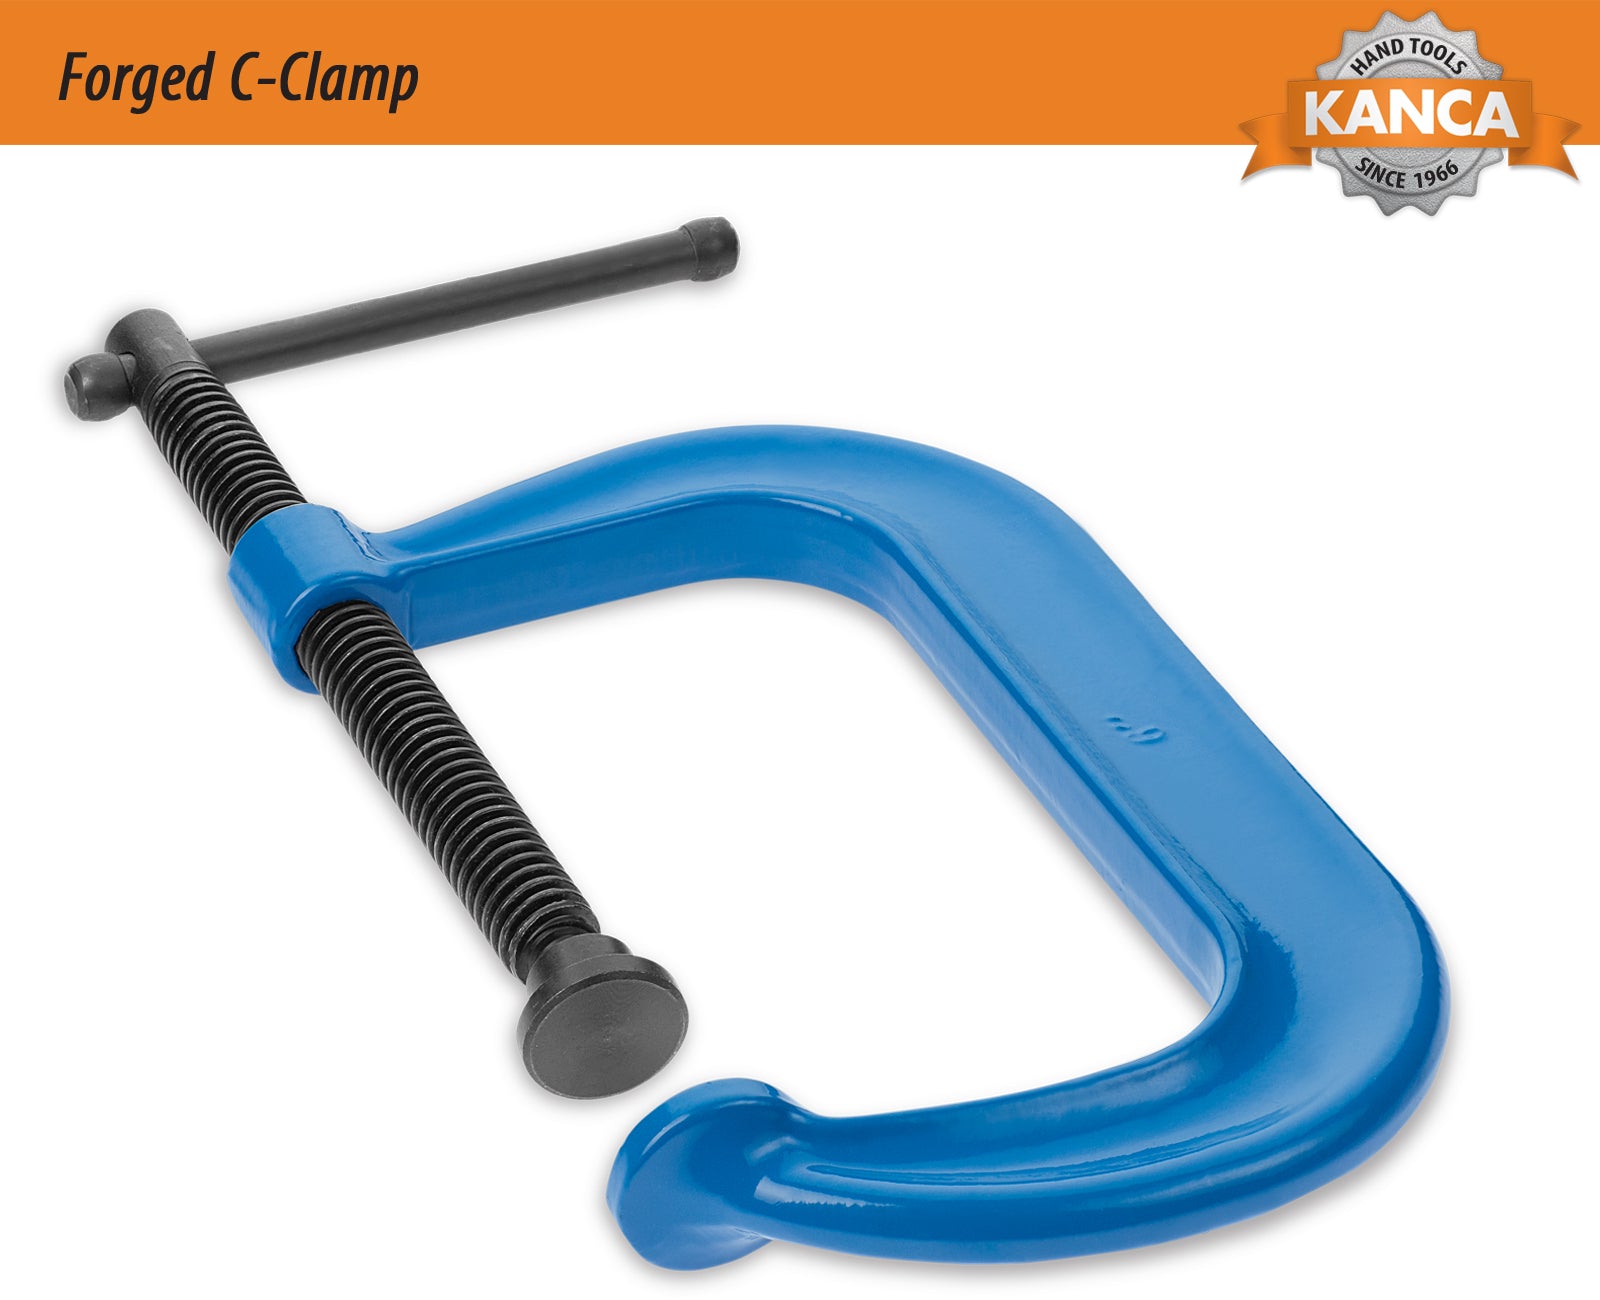 KANCA-FC-50 Drop-Forged C-Clamps for Woodworking, Crafts, Metal